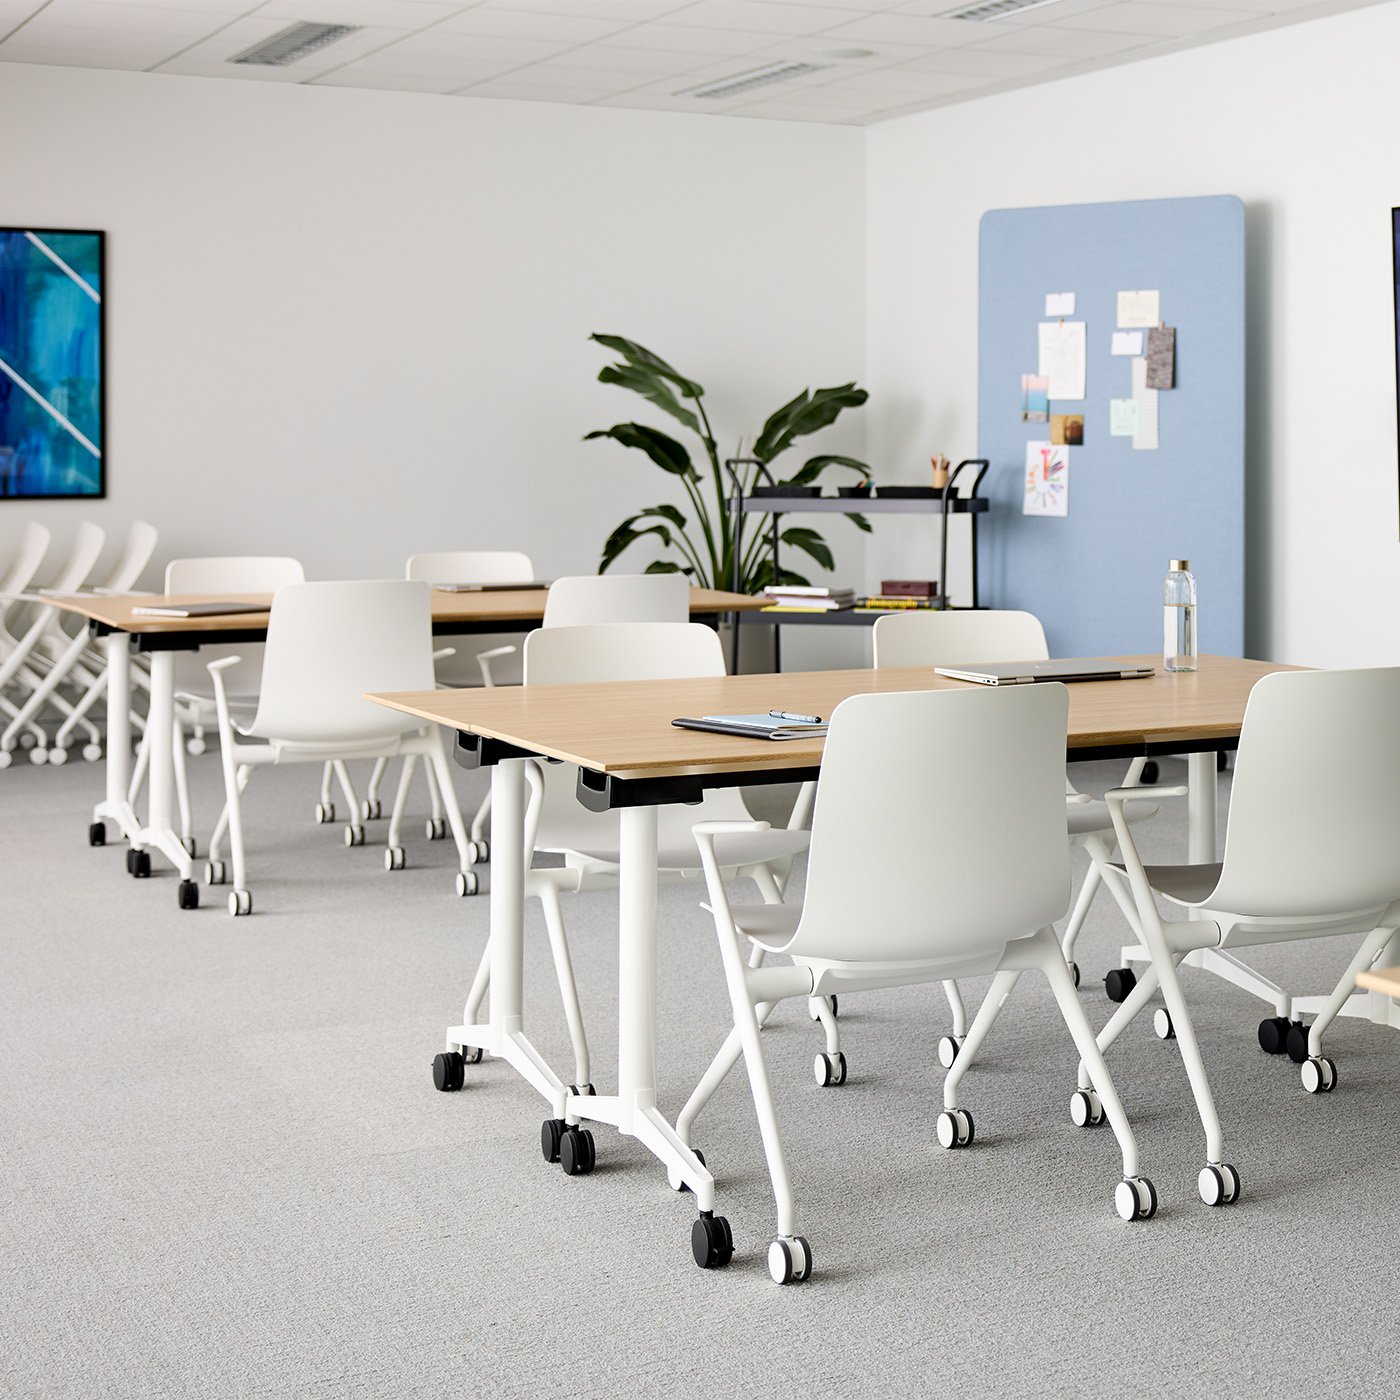 Haworth Bowi conference chairs in white